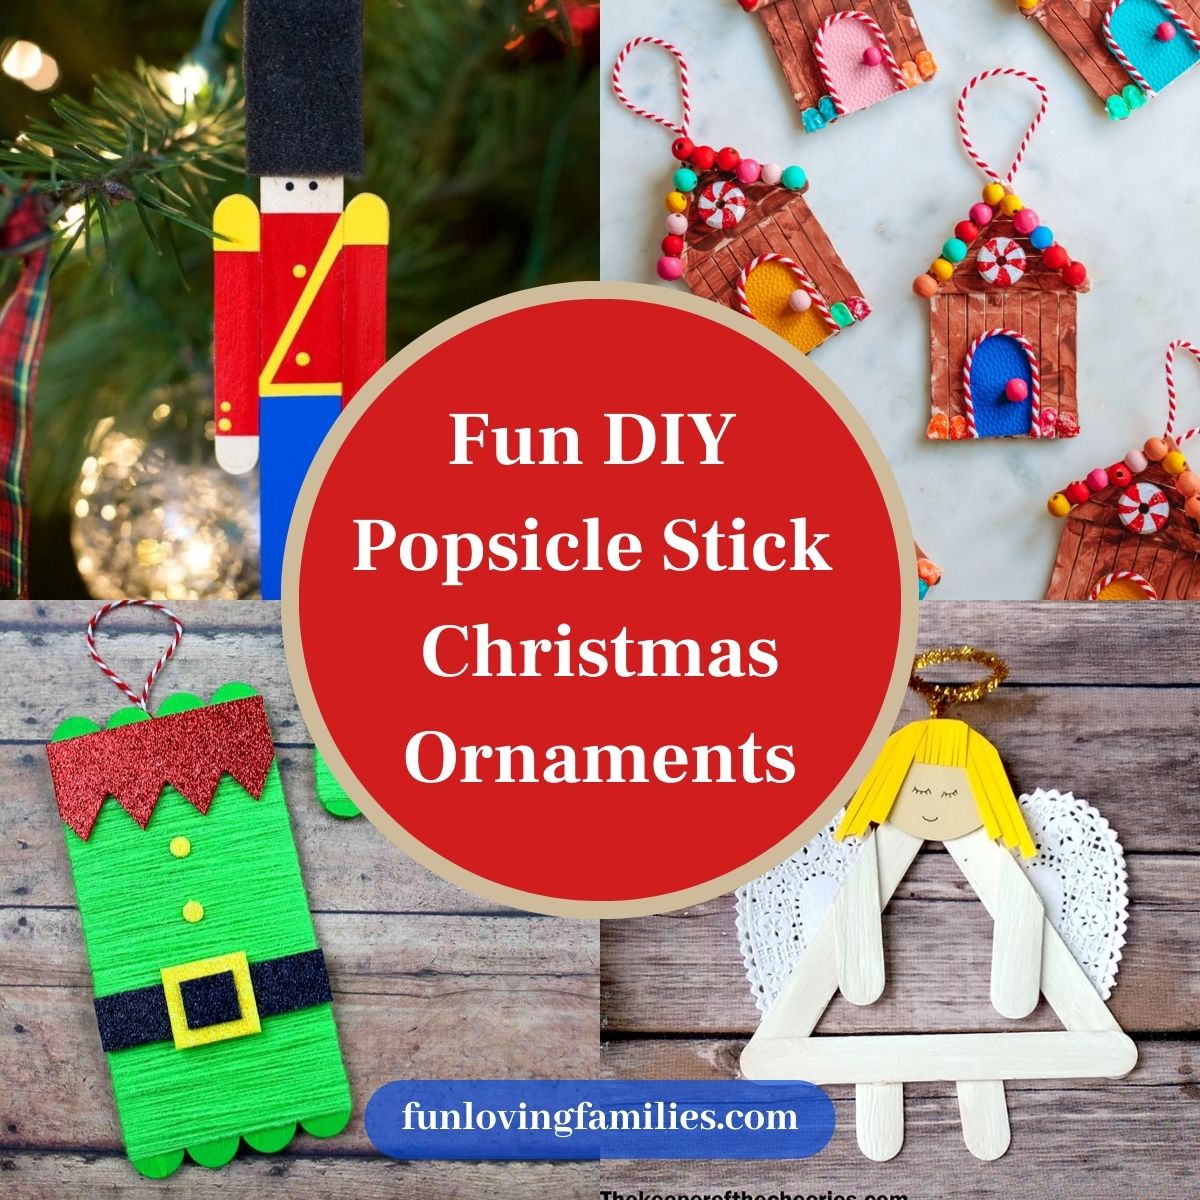 Things To Make With Popsicle Sticks - Rustic Crafts & DIY